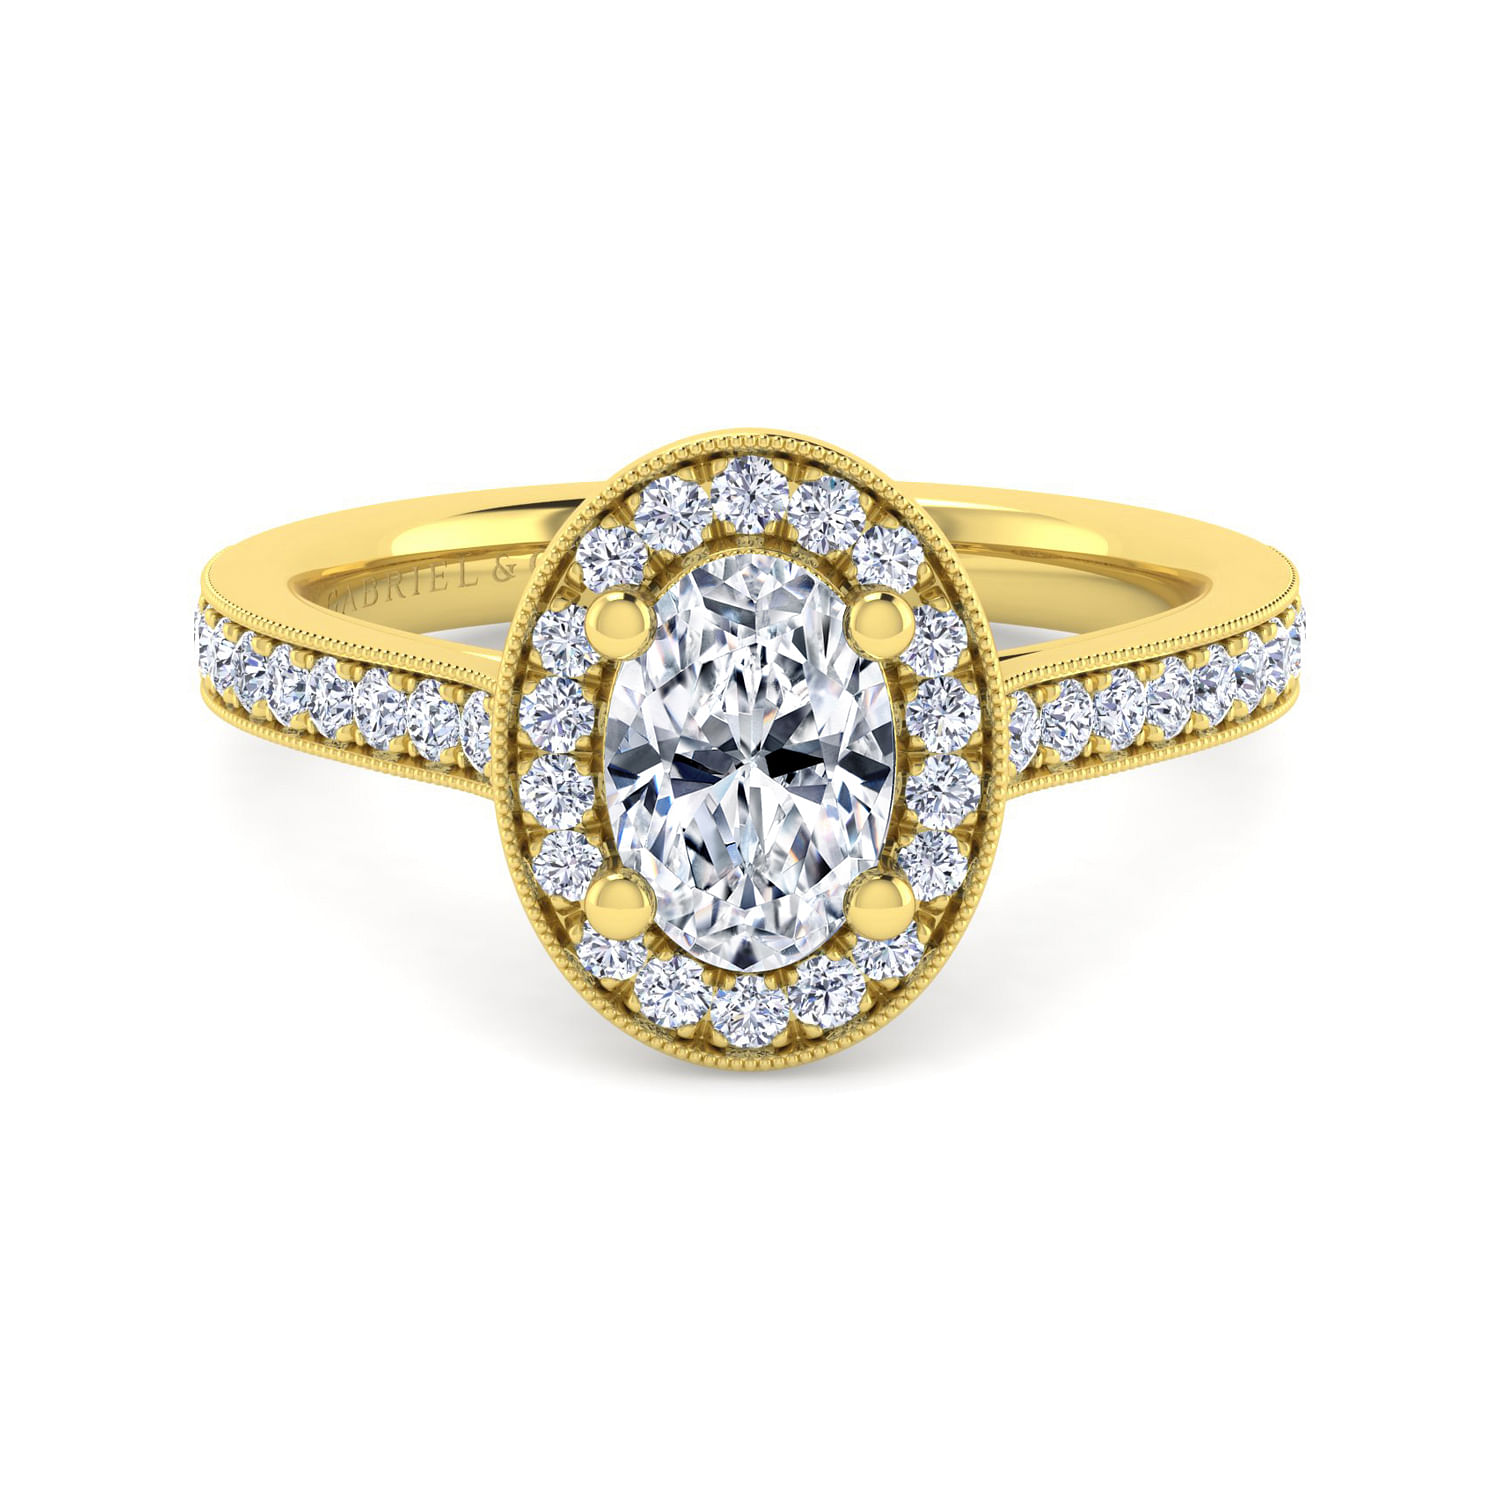 Corinne - Vintage Inspired 14K Yellow Gold Oval Halo Diamond Engagement Ring